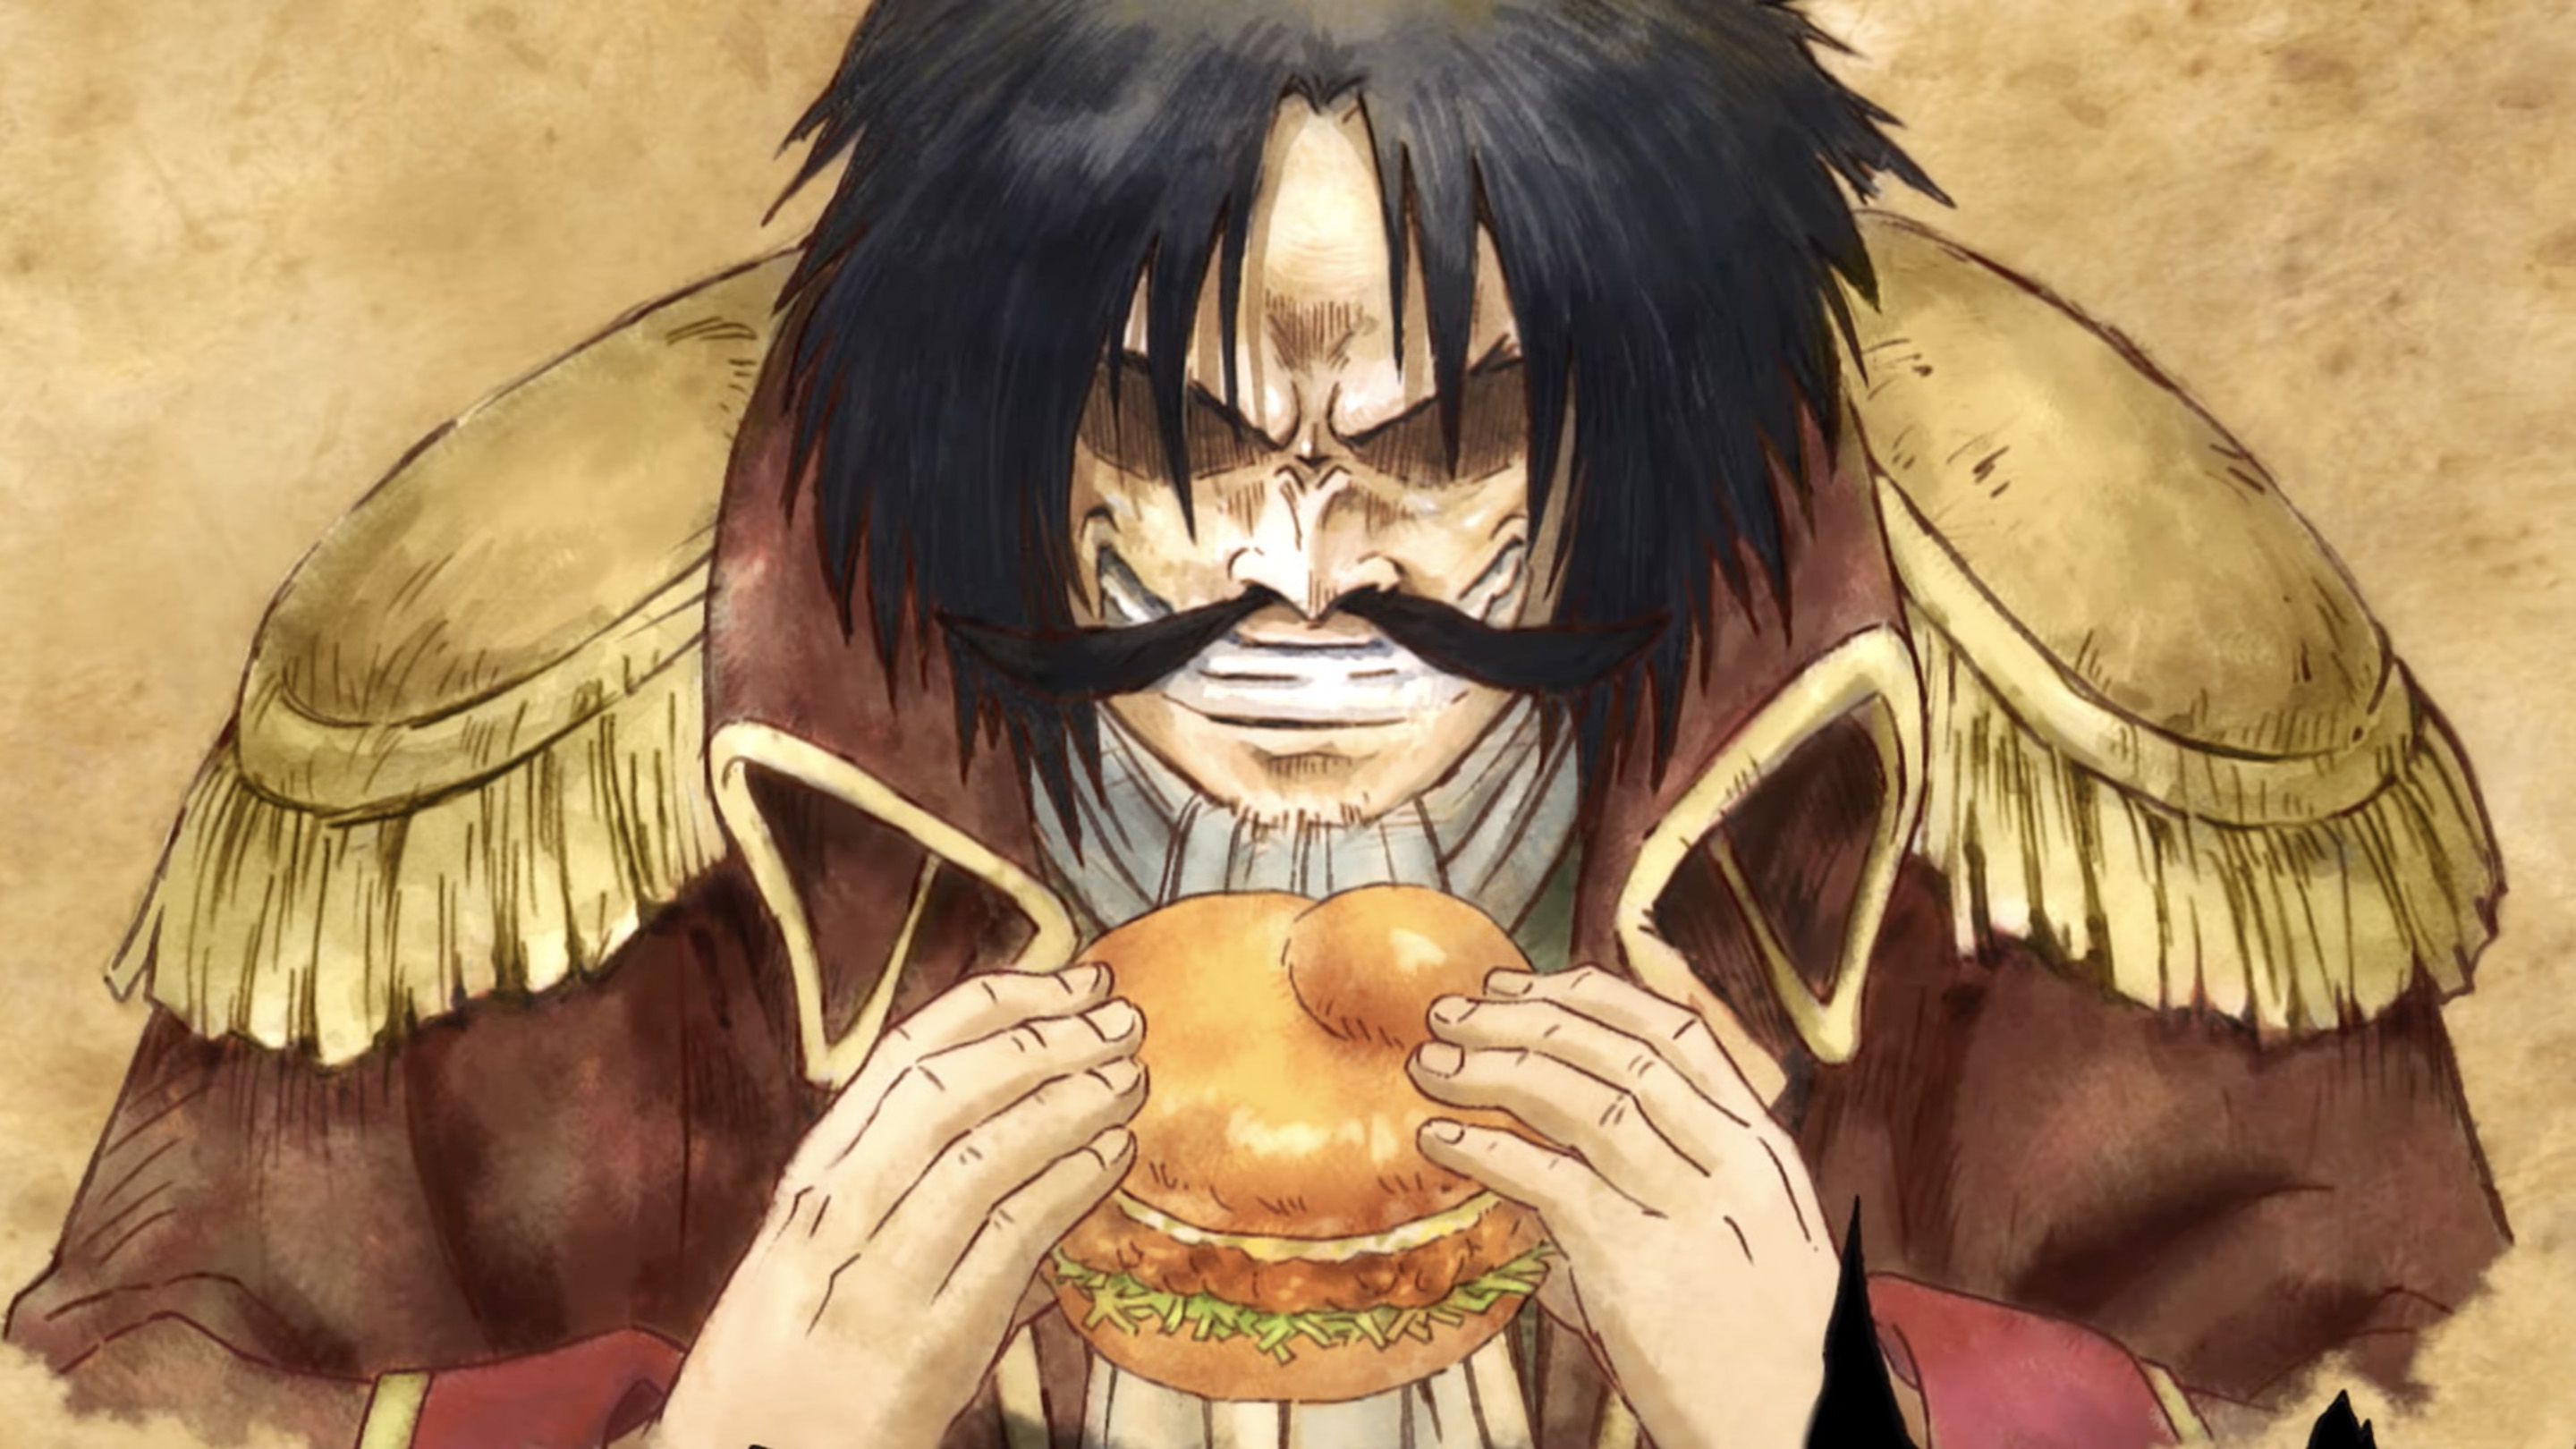 Take a Bite Out of McDonald’s Japan’s First One Piece Anime Opening Recreation